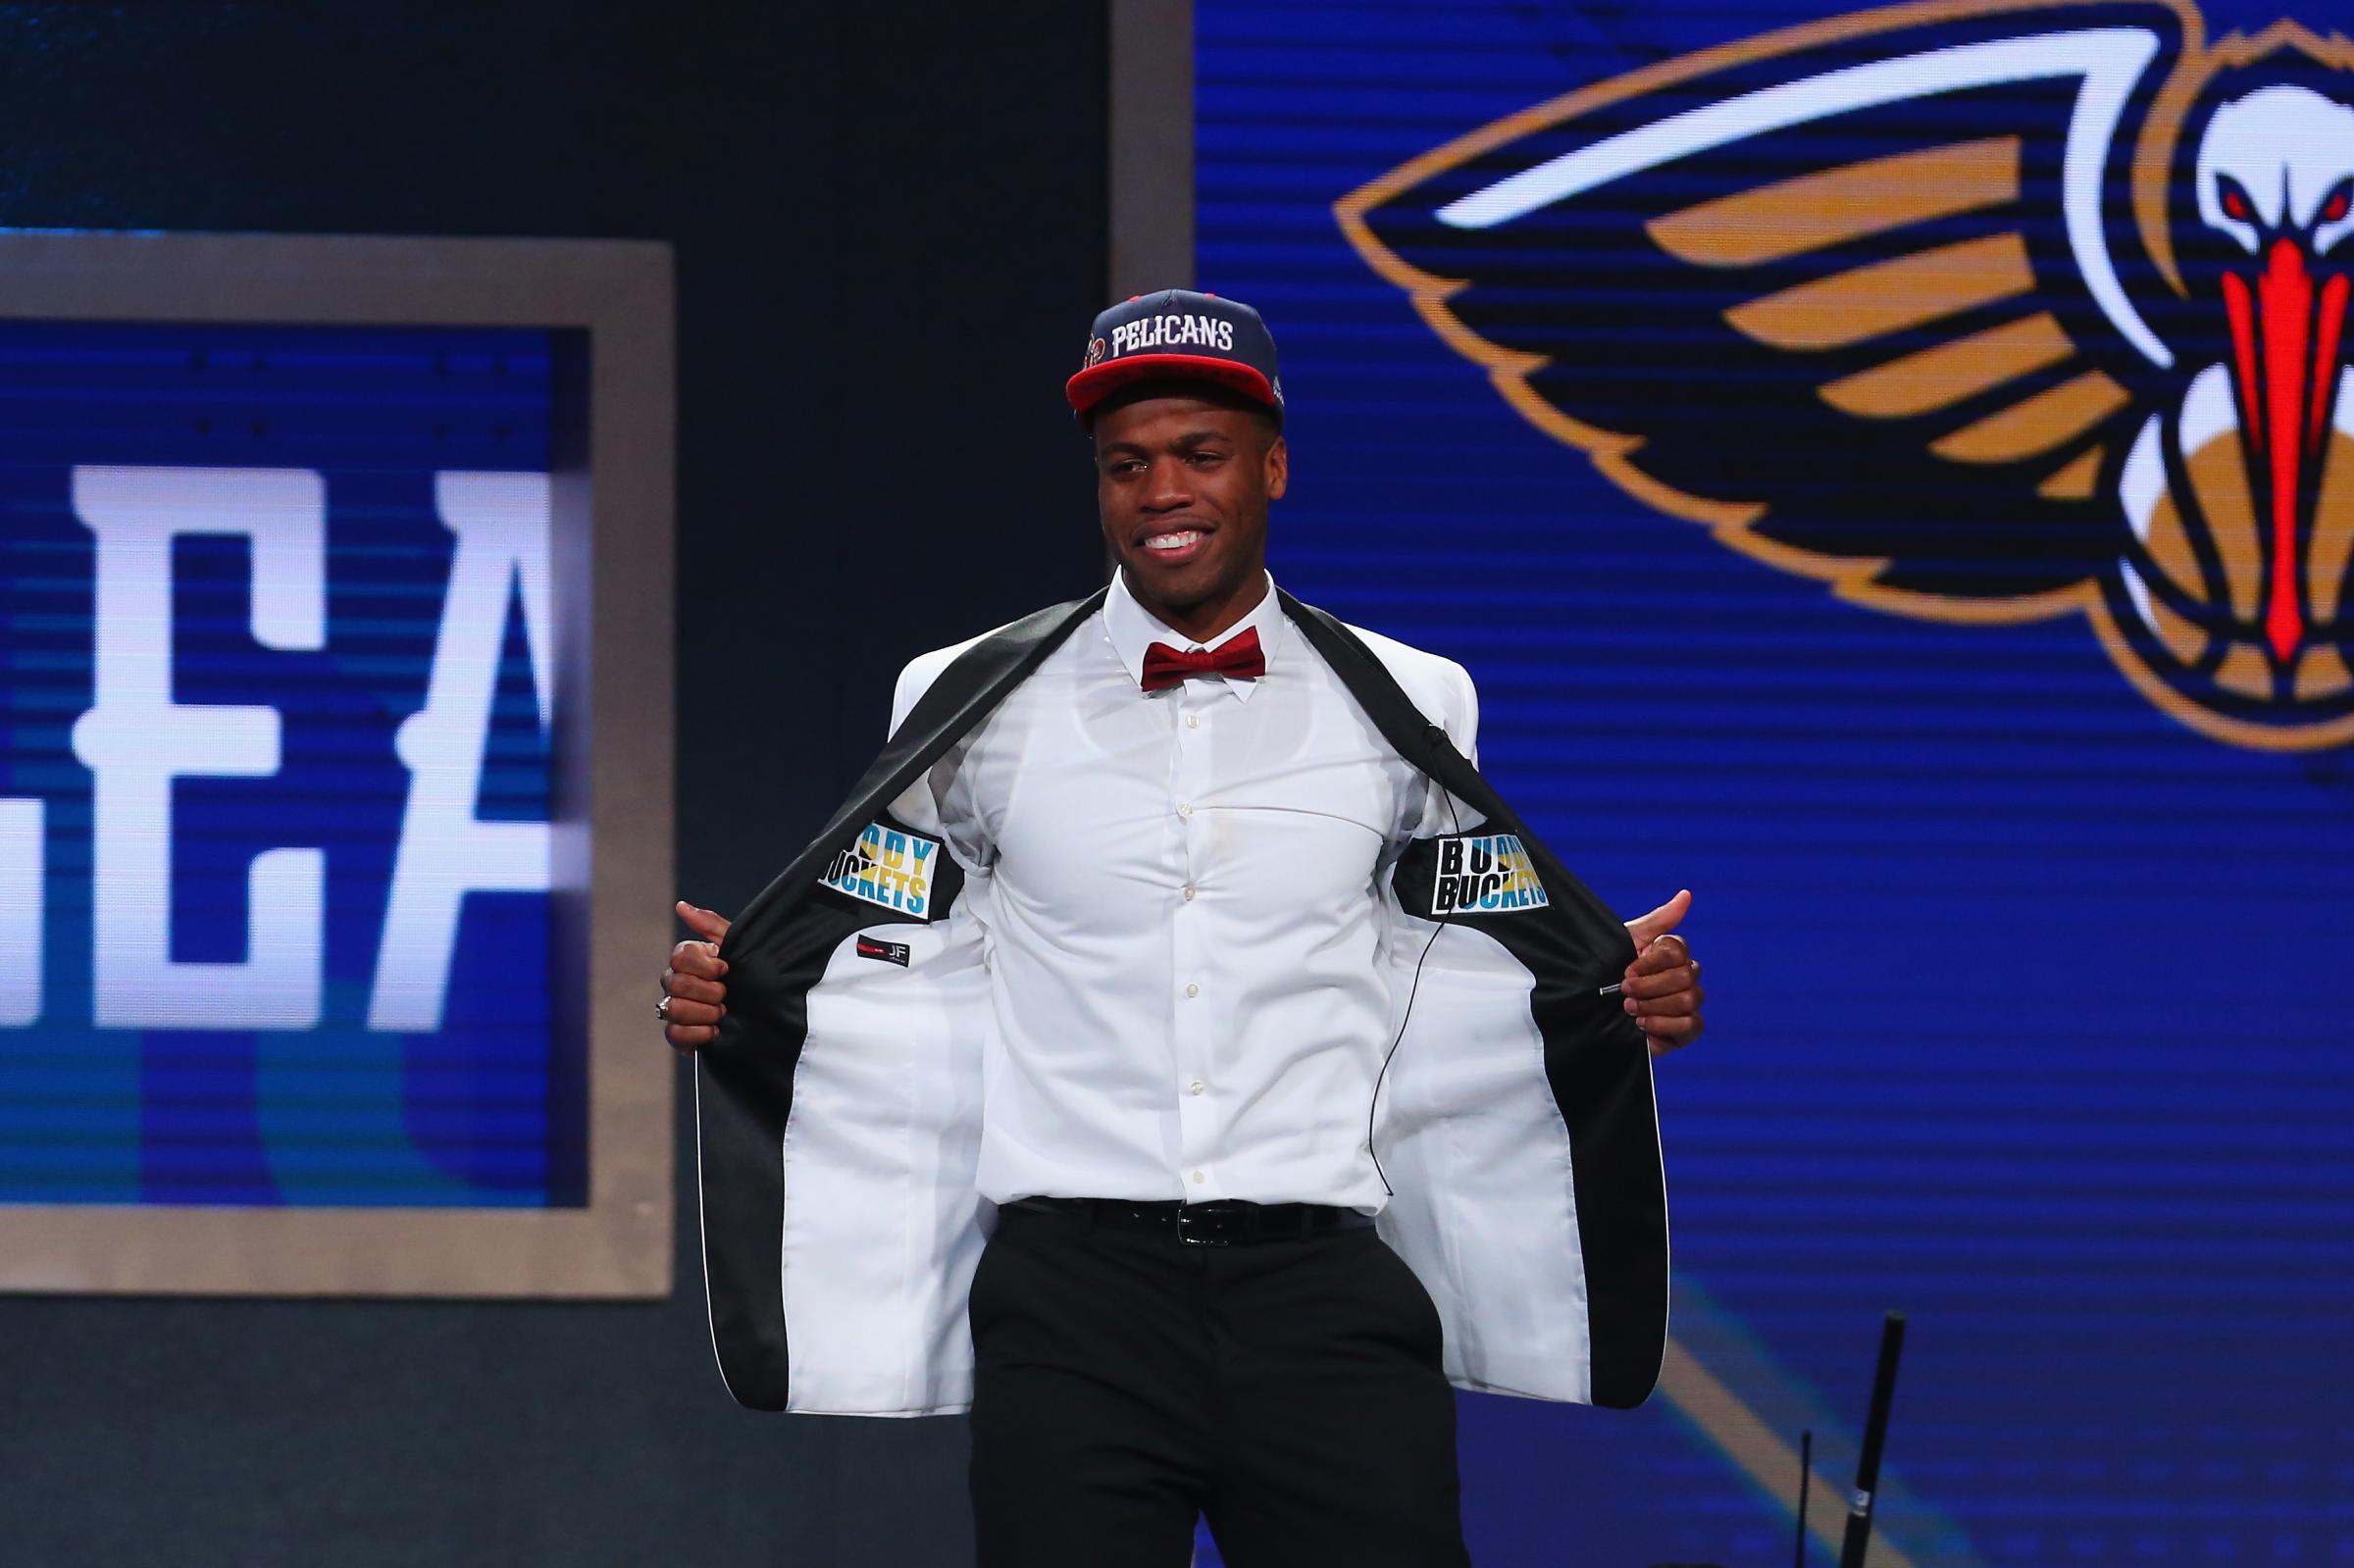 Buddy Hield went for a dapper white tuxedo jacket, which was nicely complemented by his red bow tie and his "Buddy Buckets" embellishments inside the jacket.